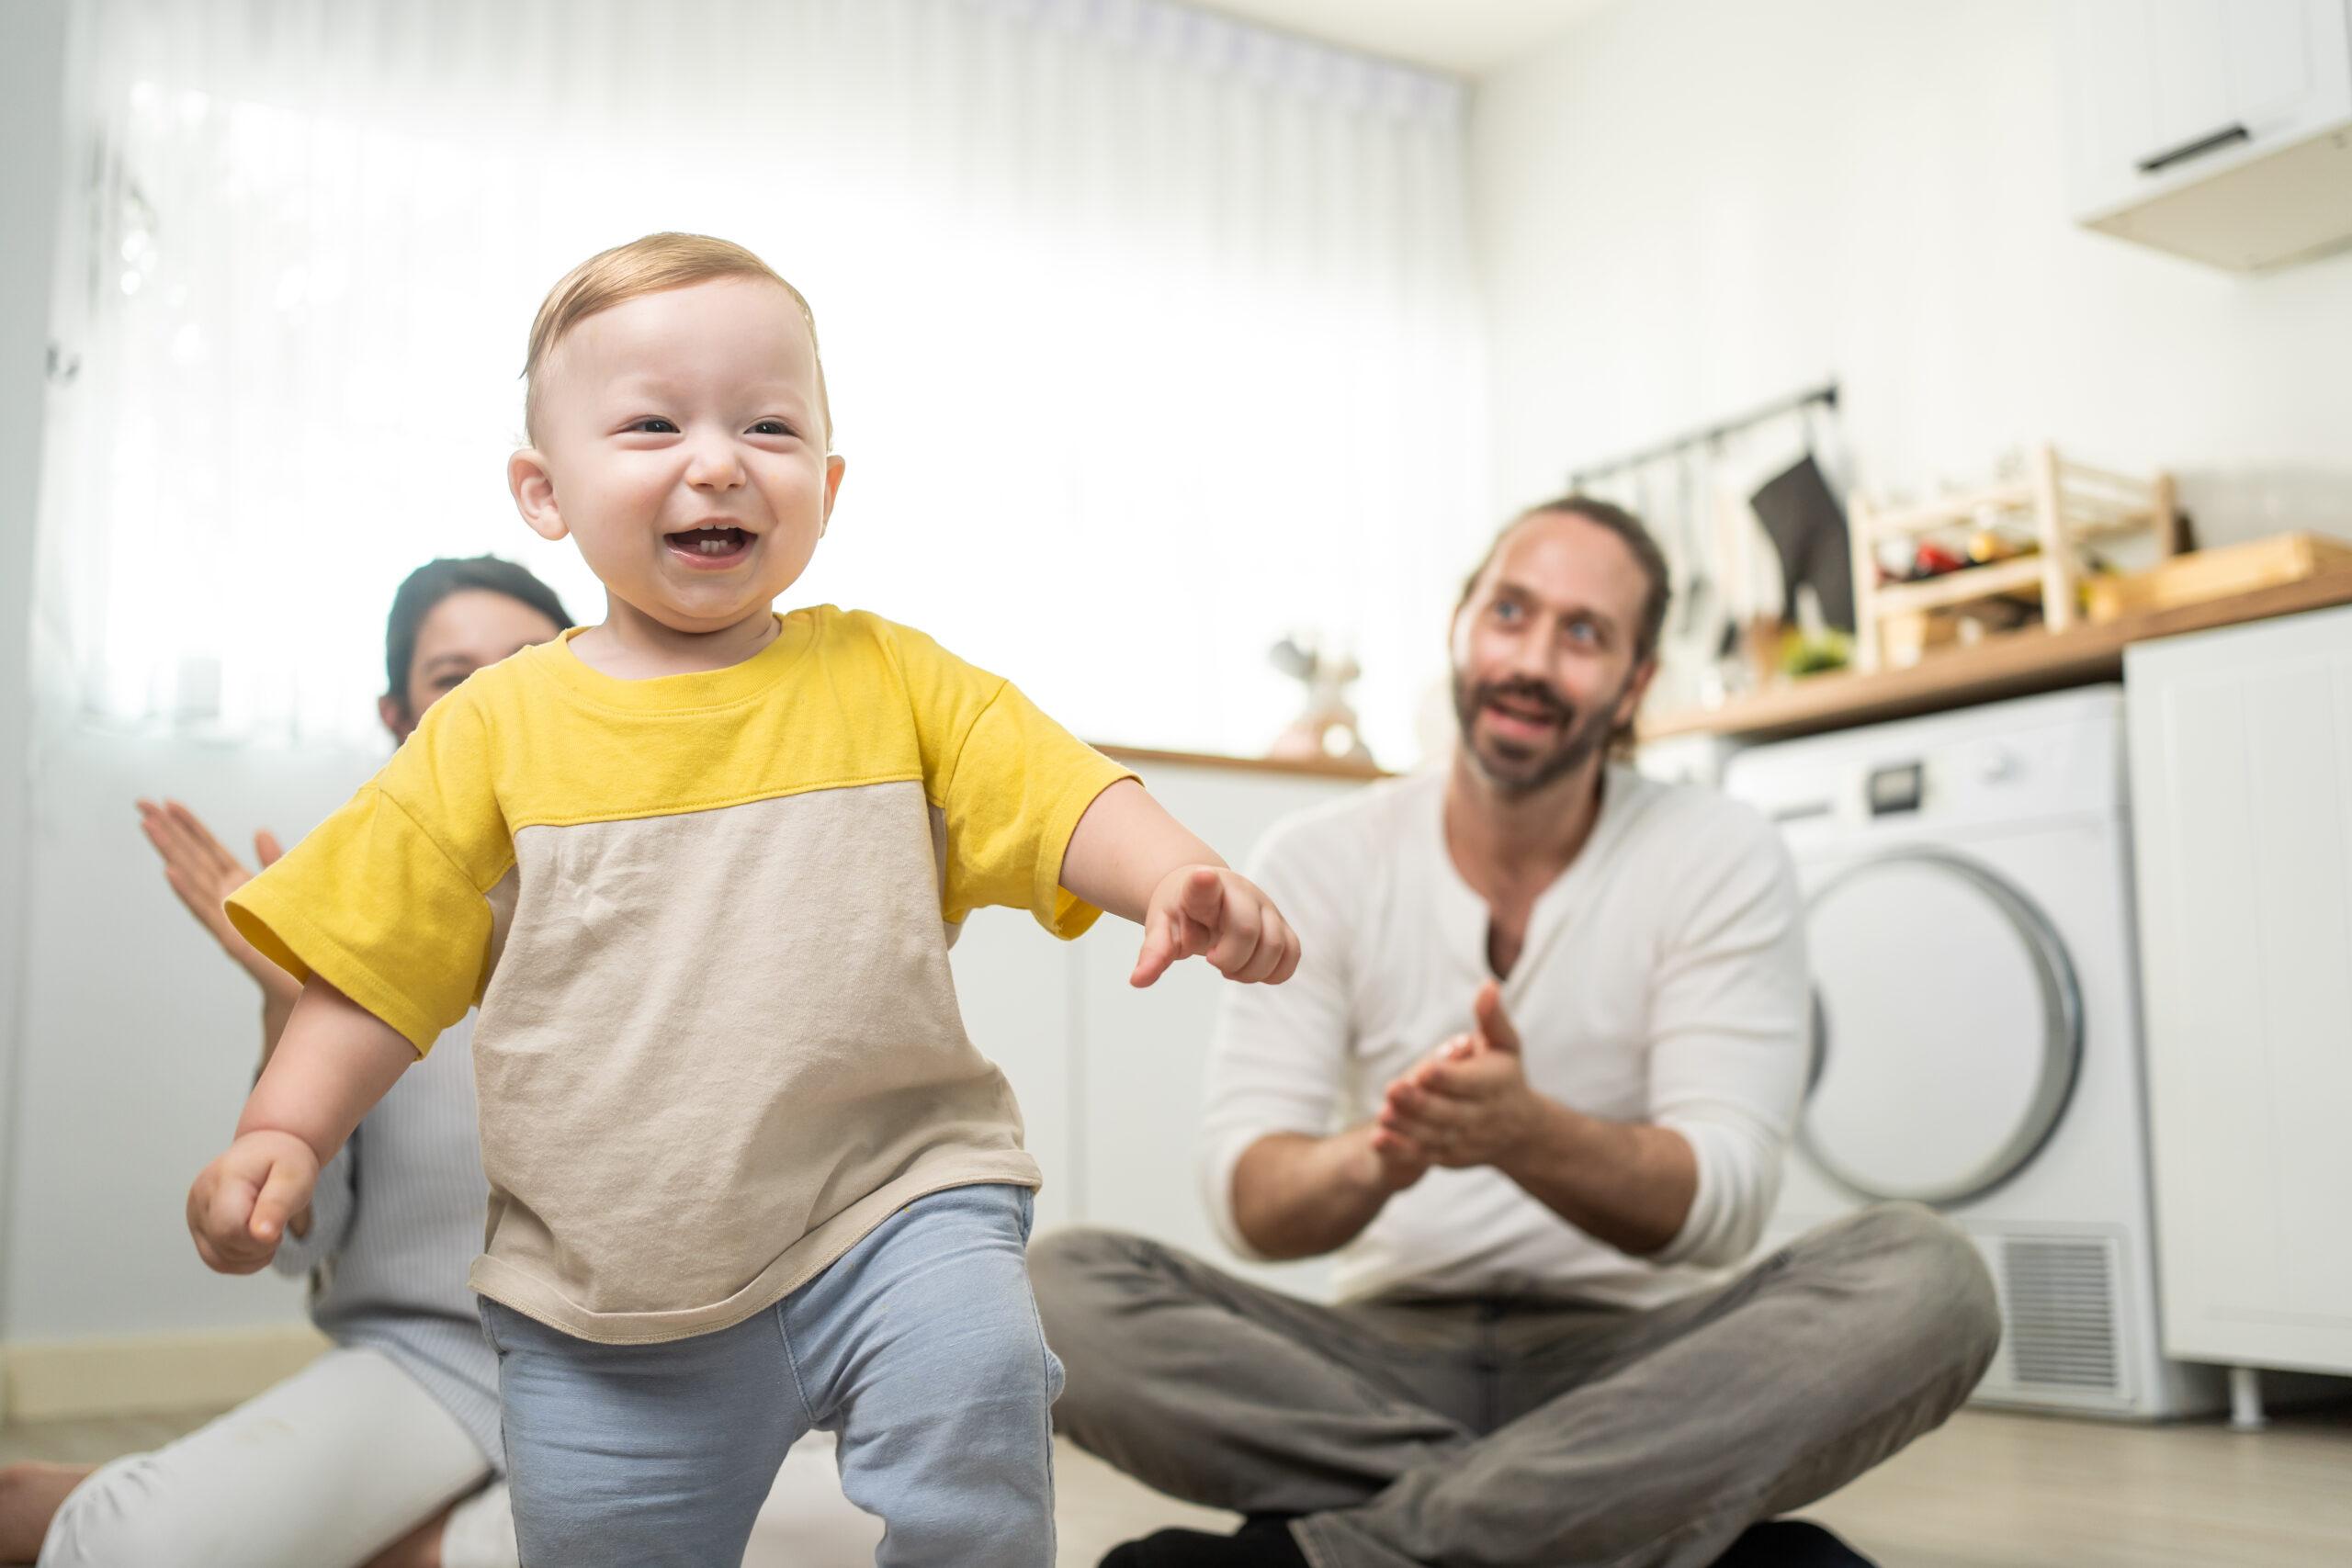 Caucasian baby boy child learn to walk with parents support in house. Happy family, mother and father helping young toddler son taking first step walk on floor to develop skill in living room at home.;